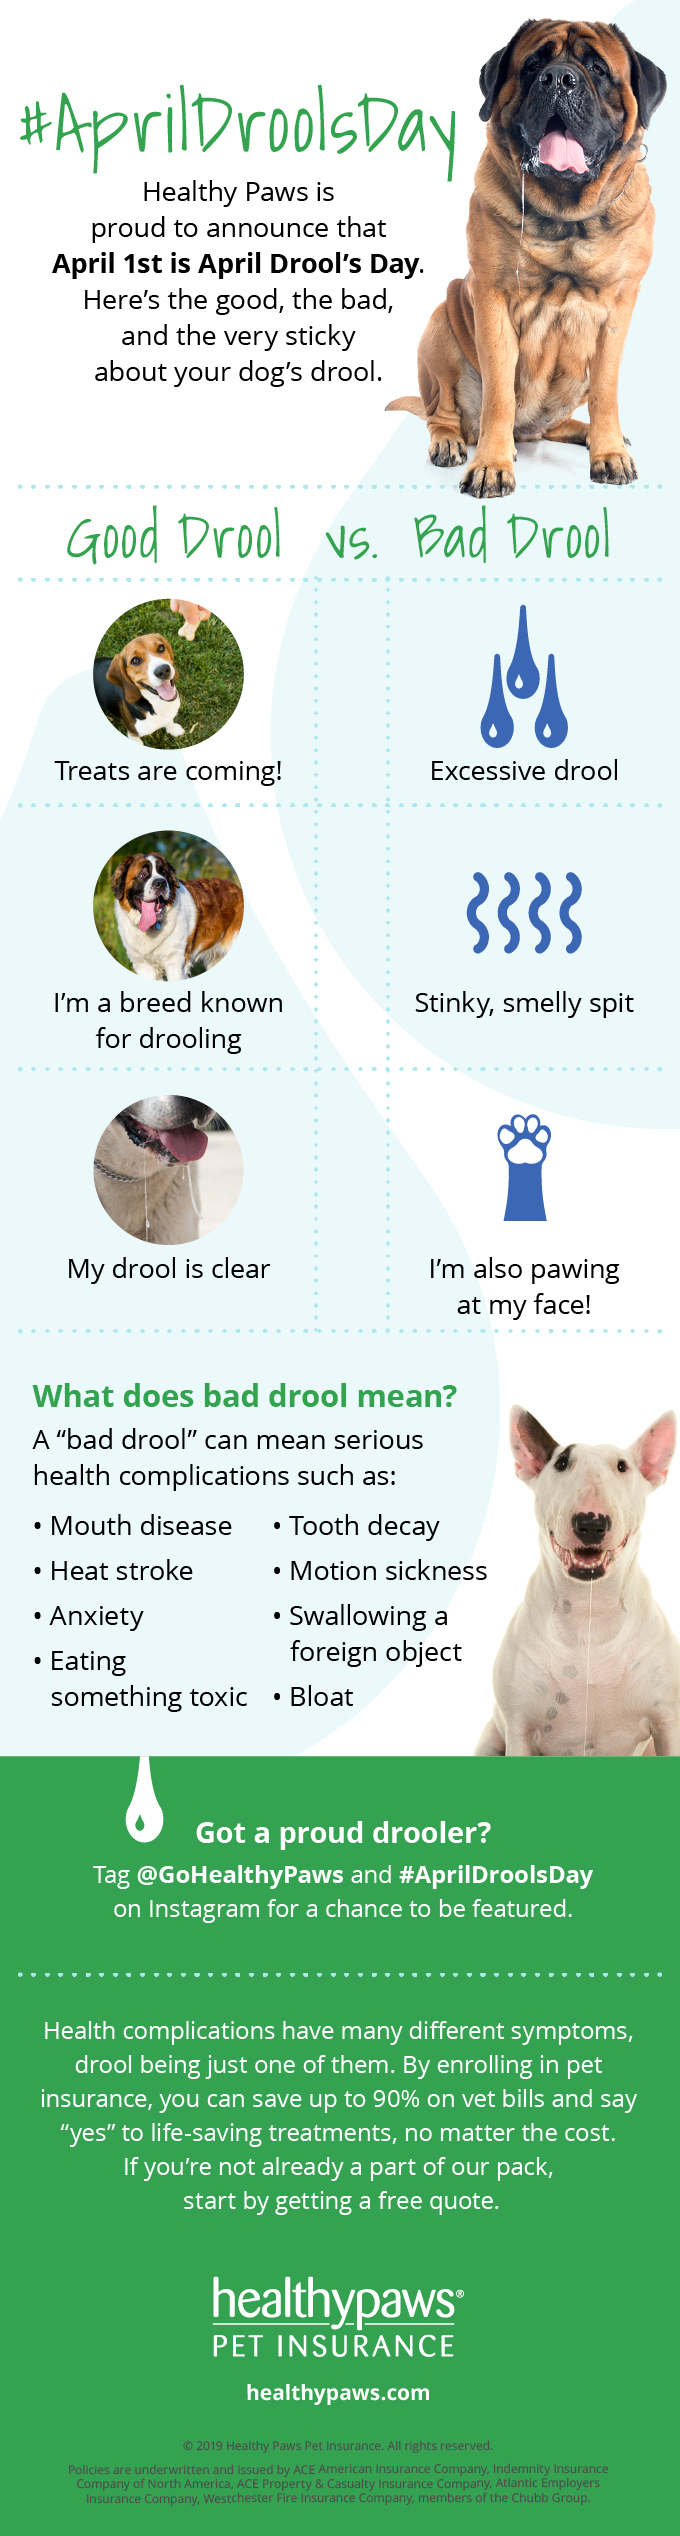 April Drools day infographic